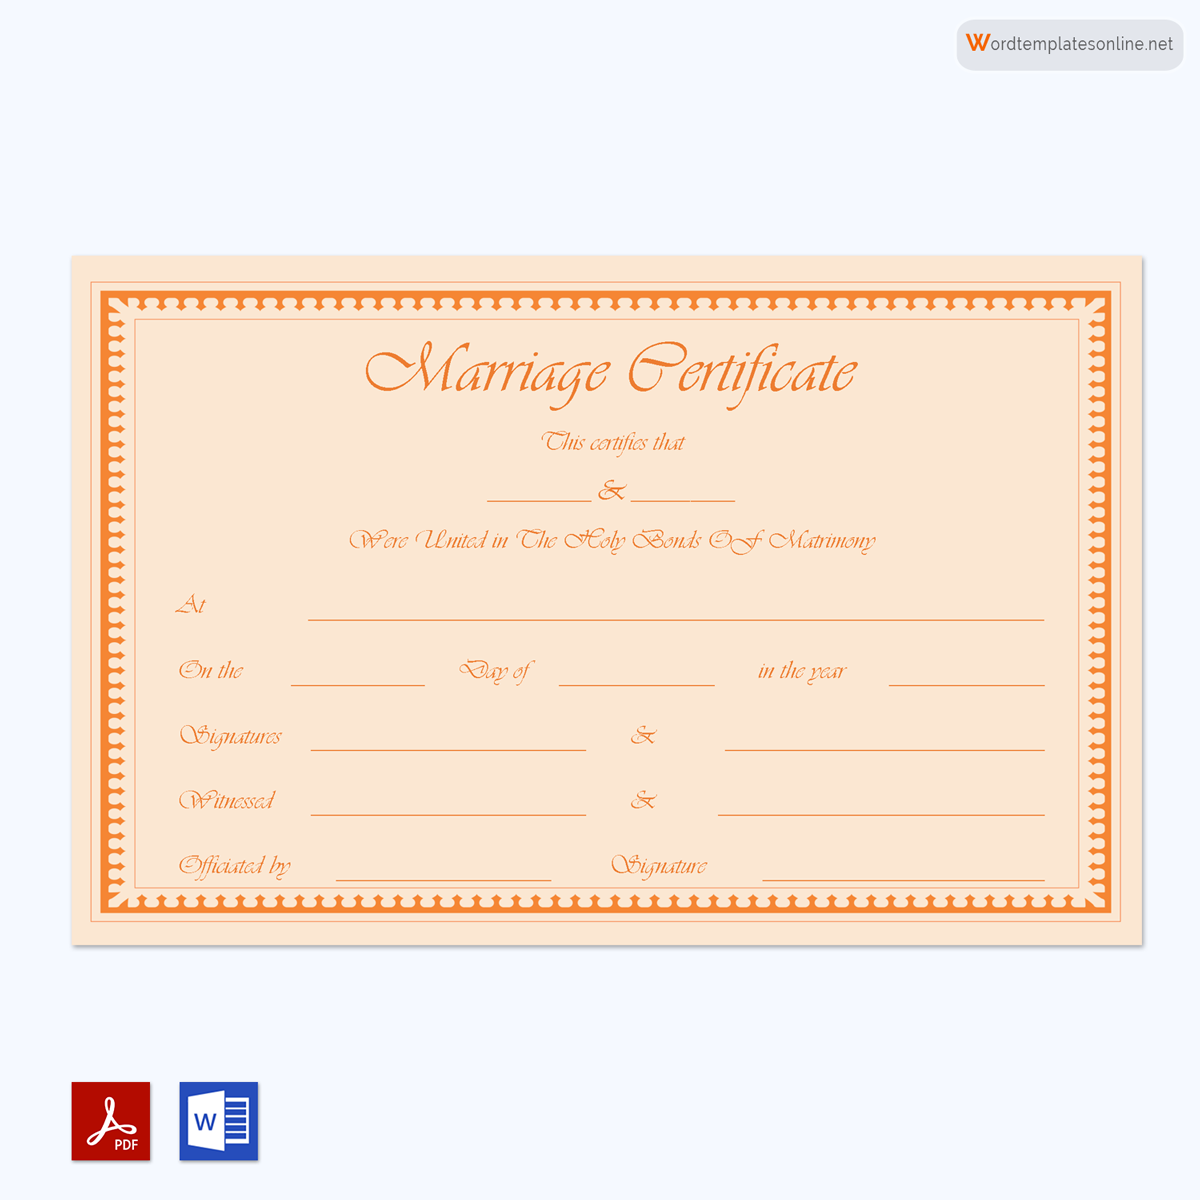  marriage certificate online fake 09